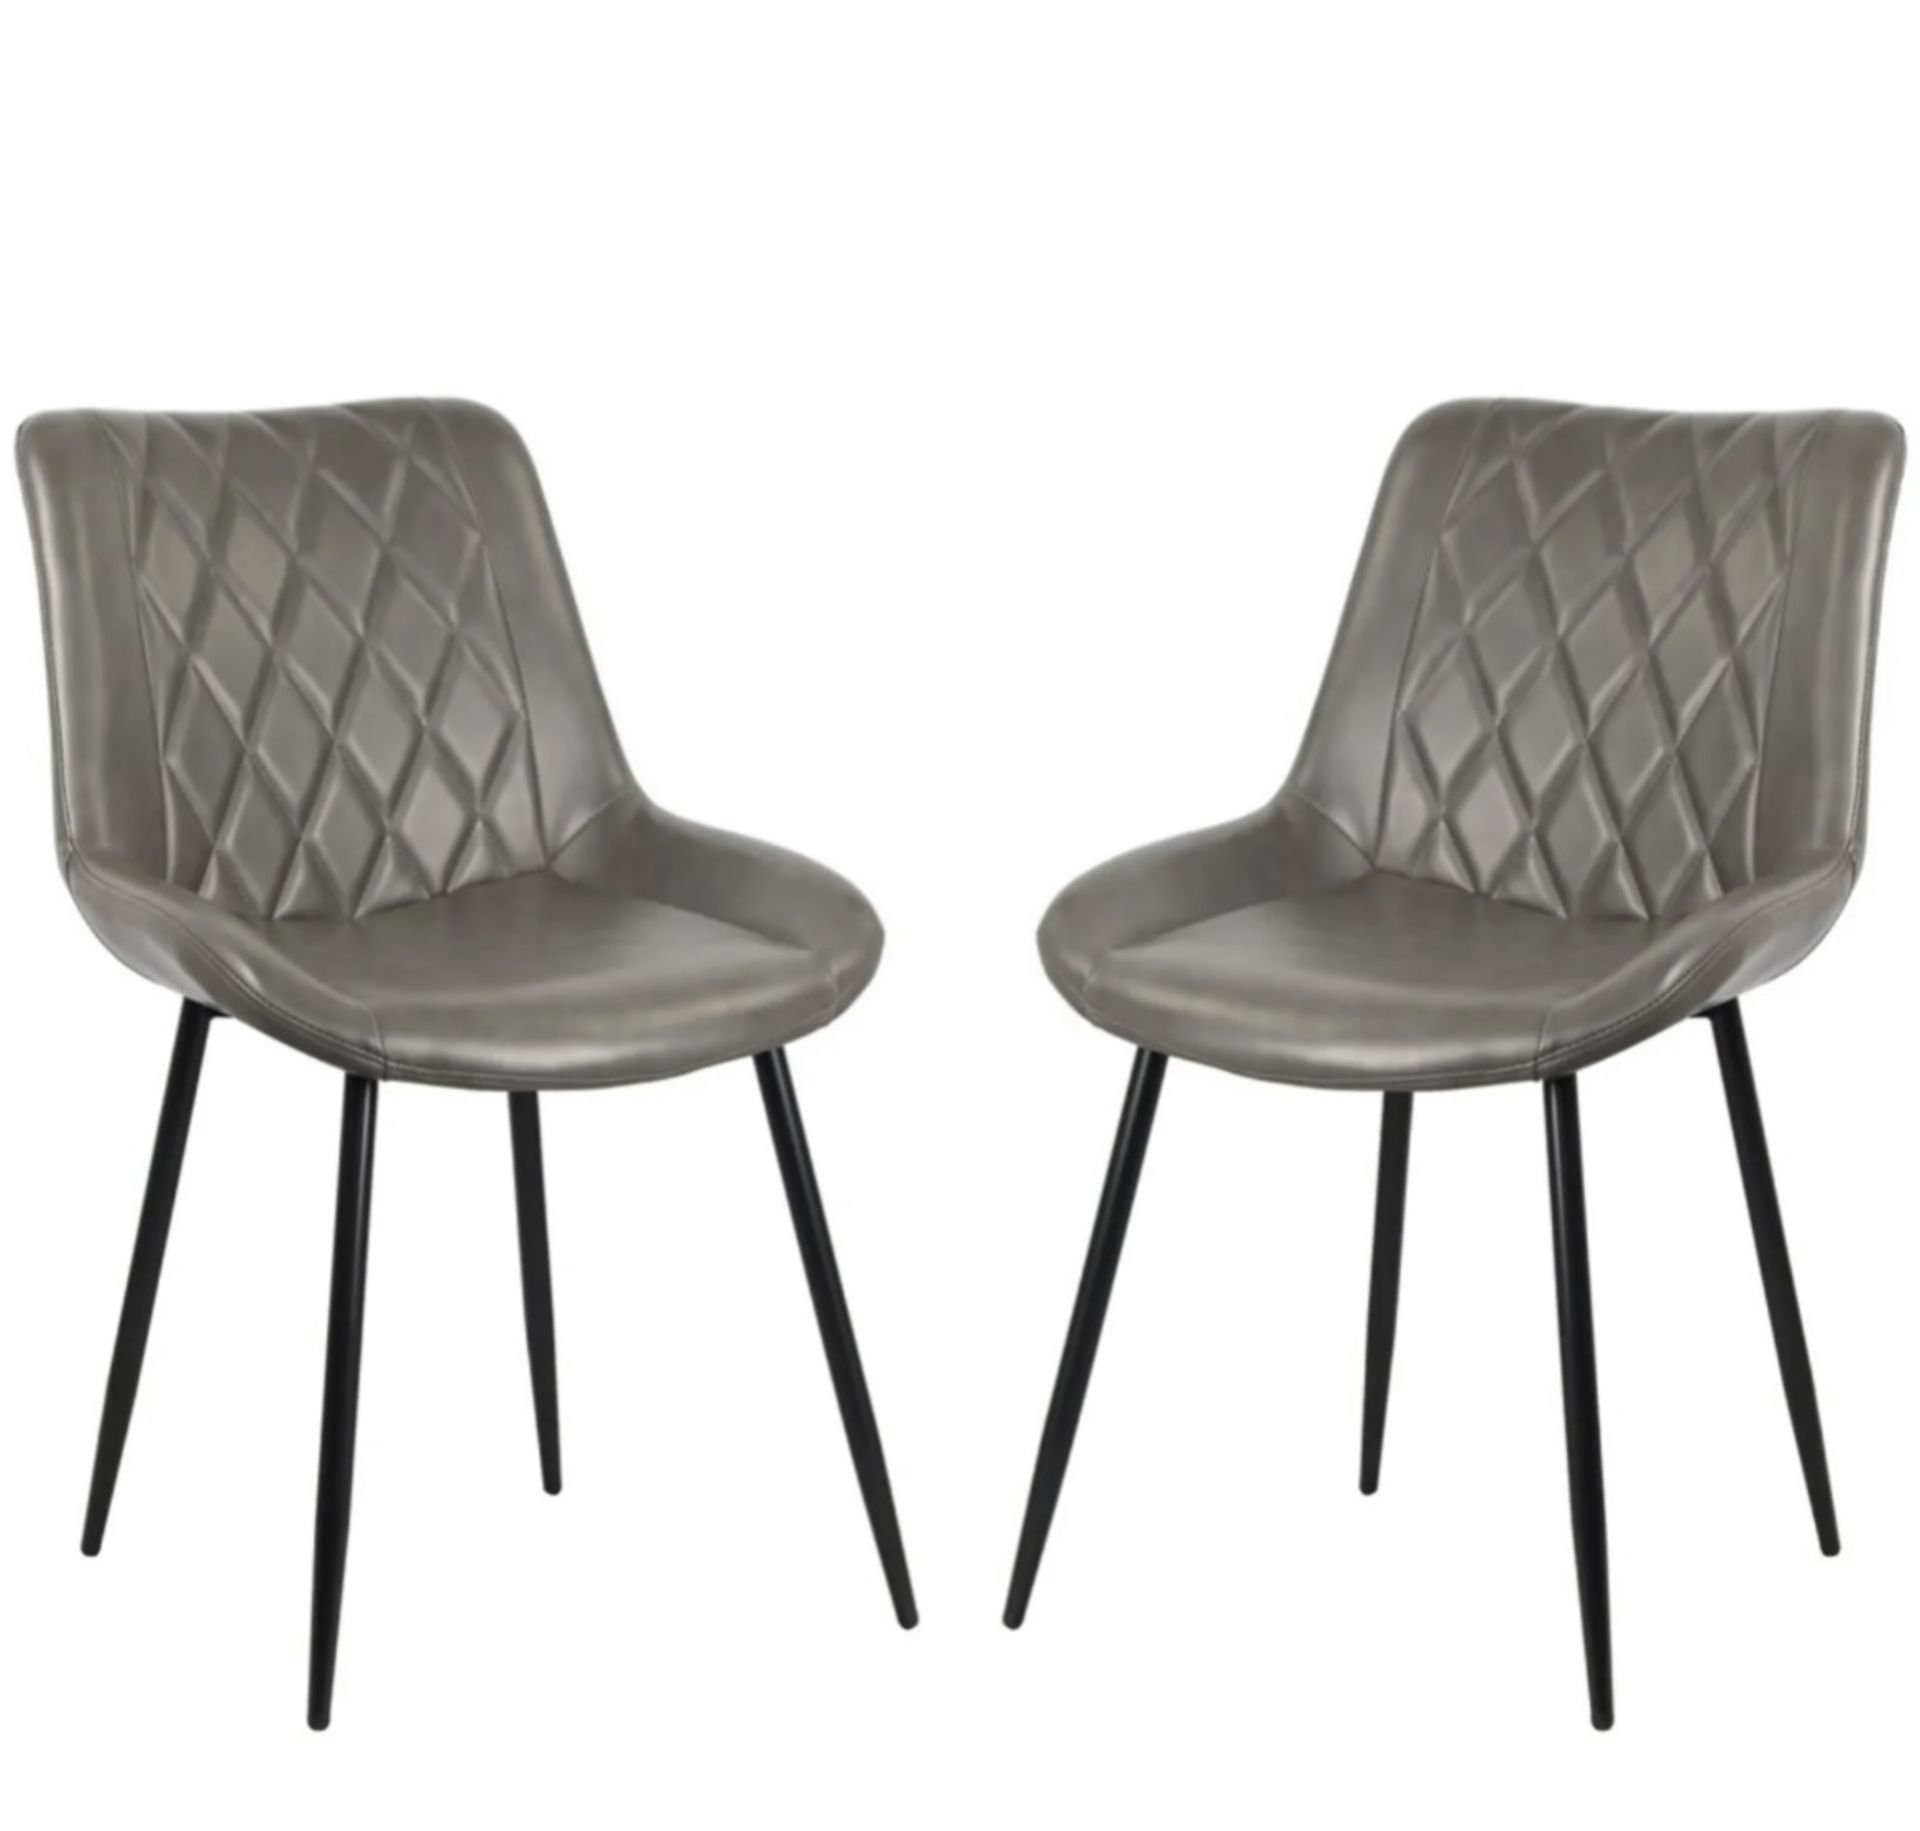 X8 BRAND NEW GREY VINTAGE FAUX LEATHER RESTAURANT/DINING CHAIRS